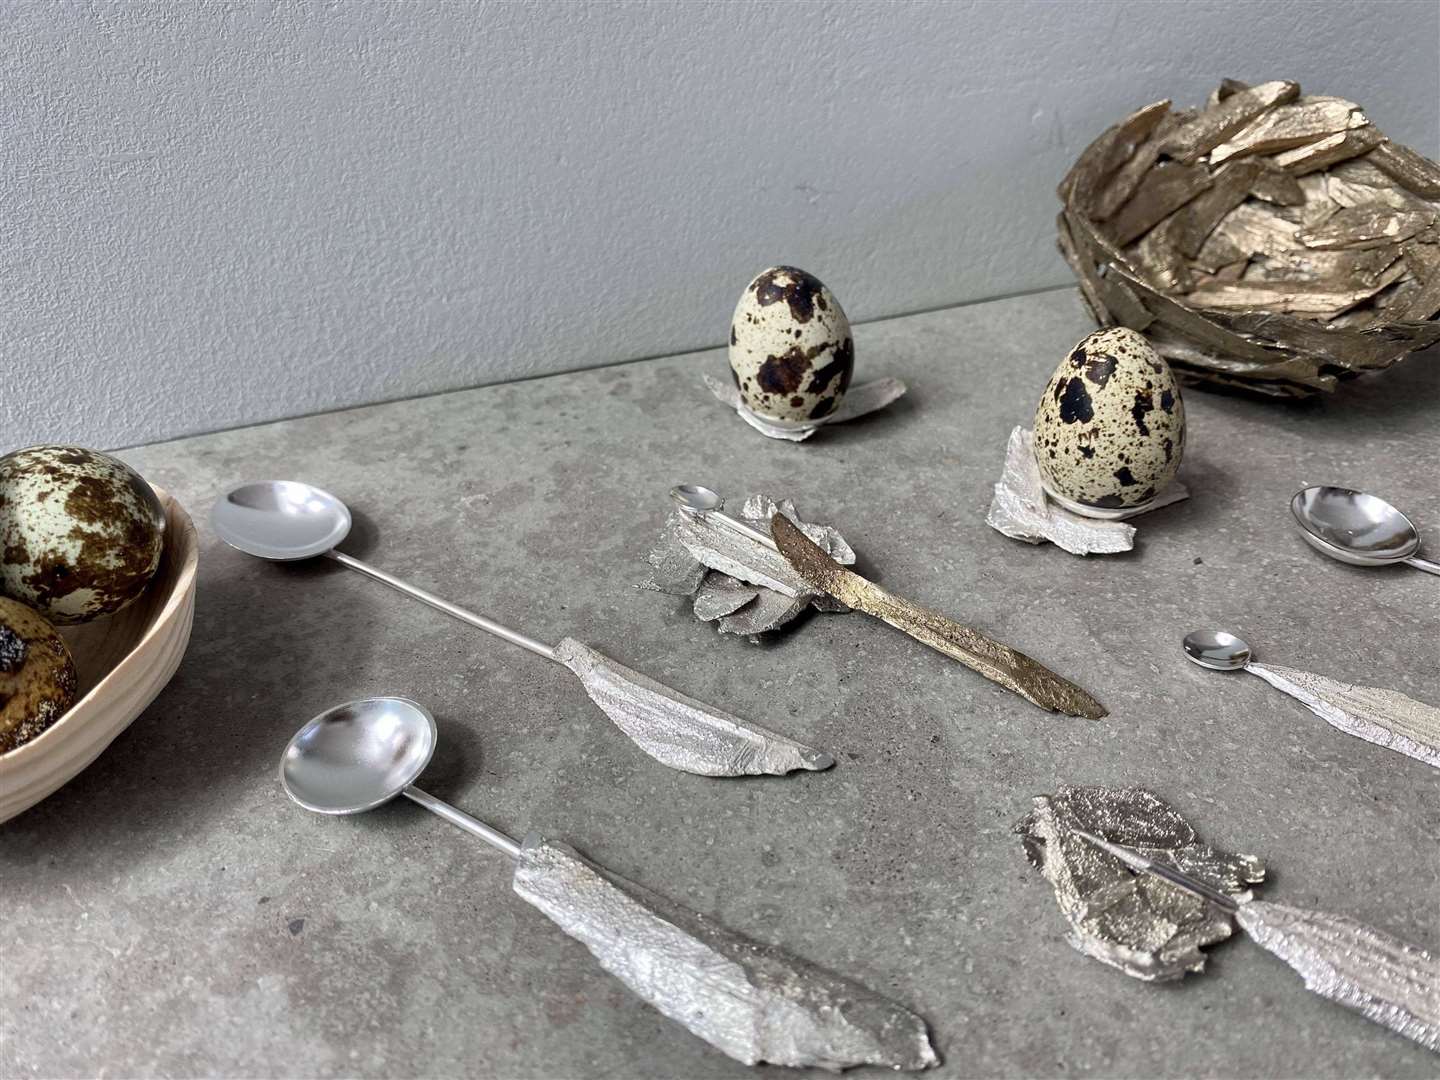 Quail spoons, egg cups and bowls from the Boorachie collection by Scott Smith.